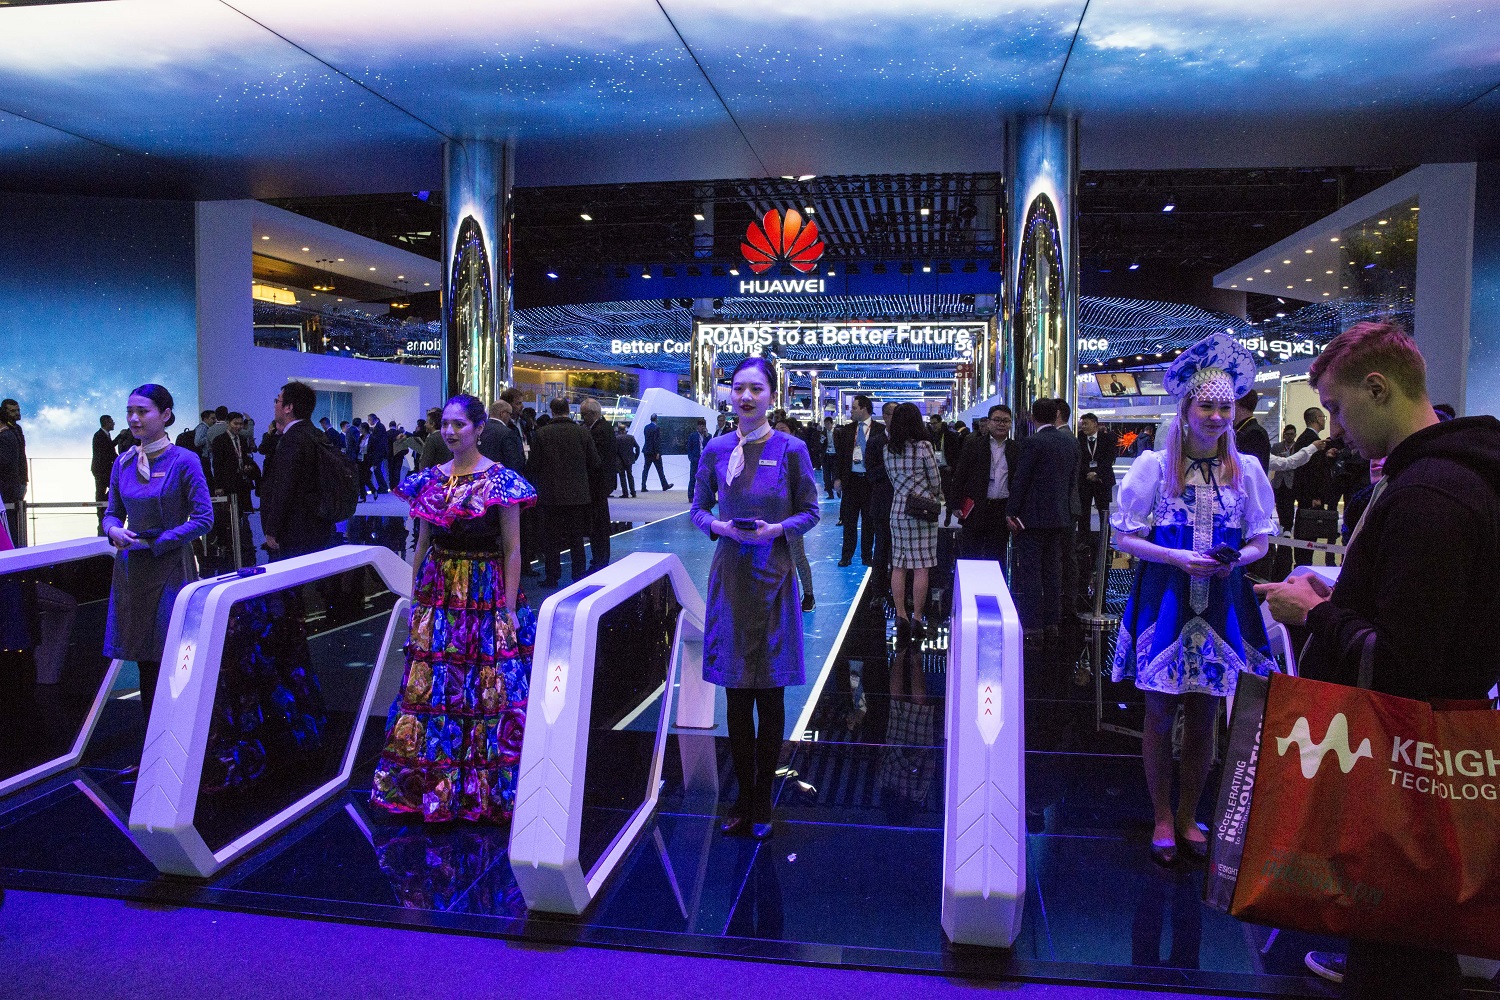 10 things we learned at Mobile World Congress